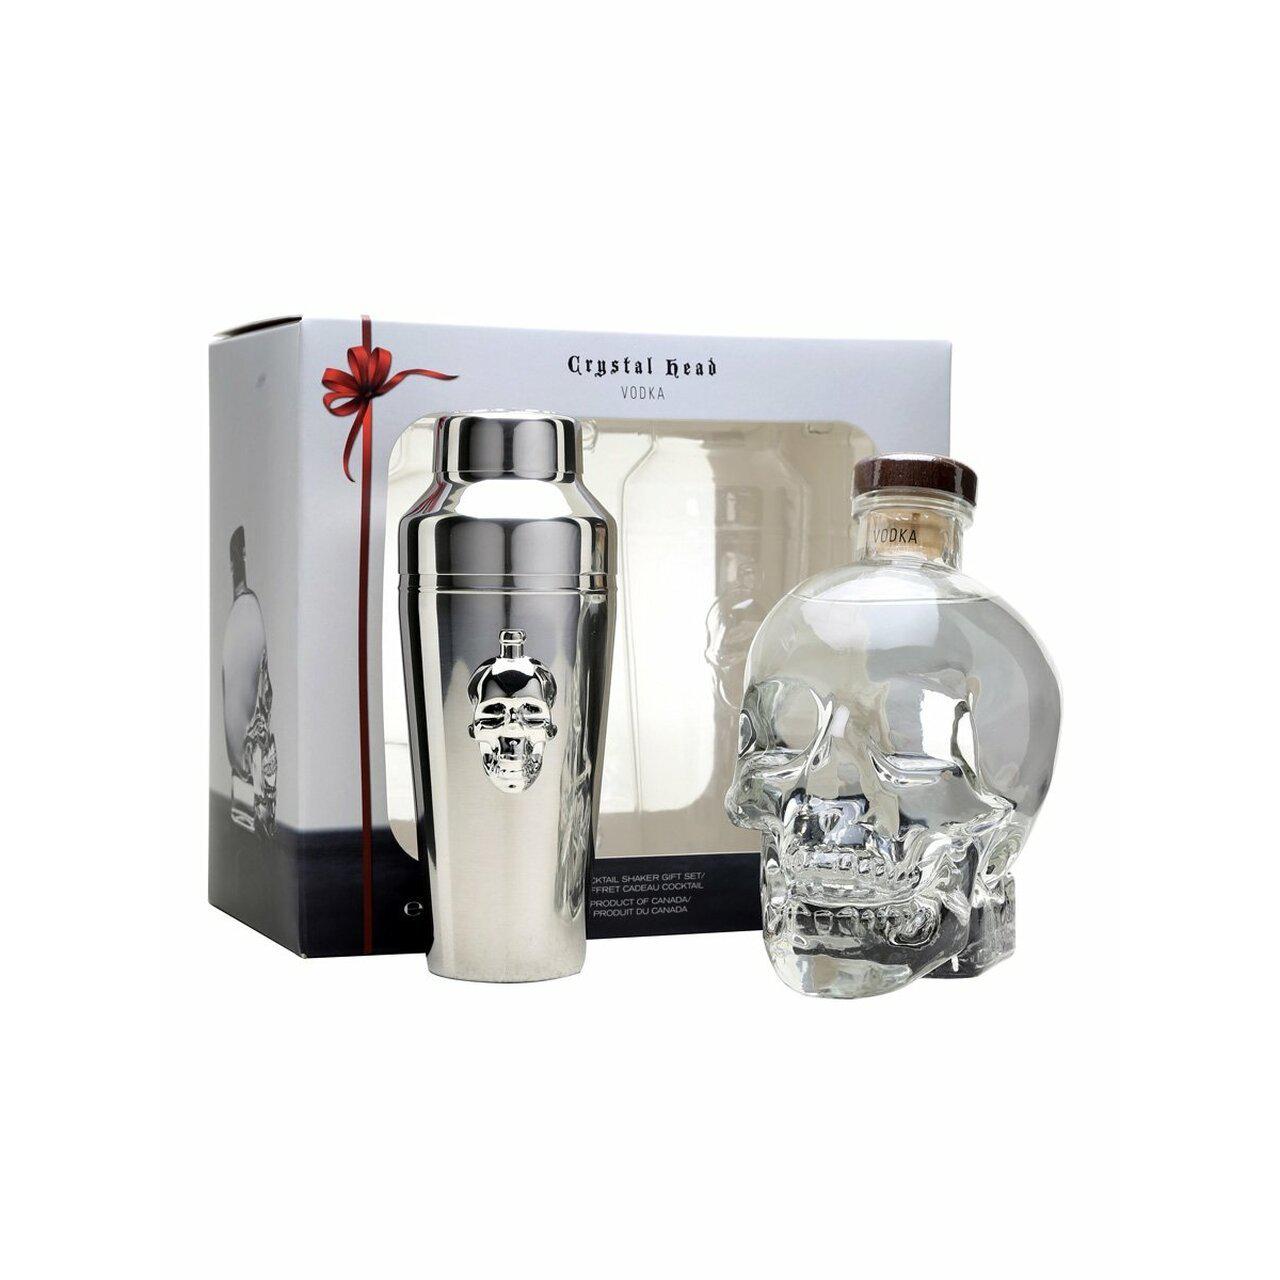 Crystal Head Vodka Gift Pack with Shaker 700ml